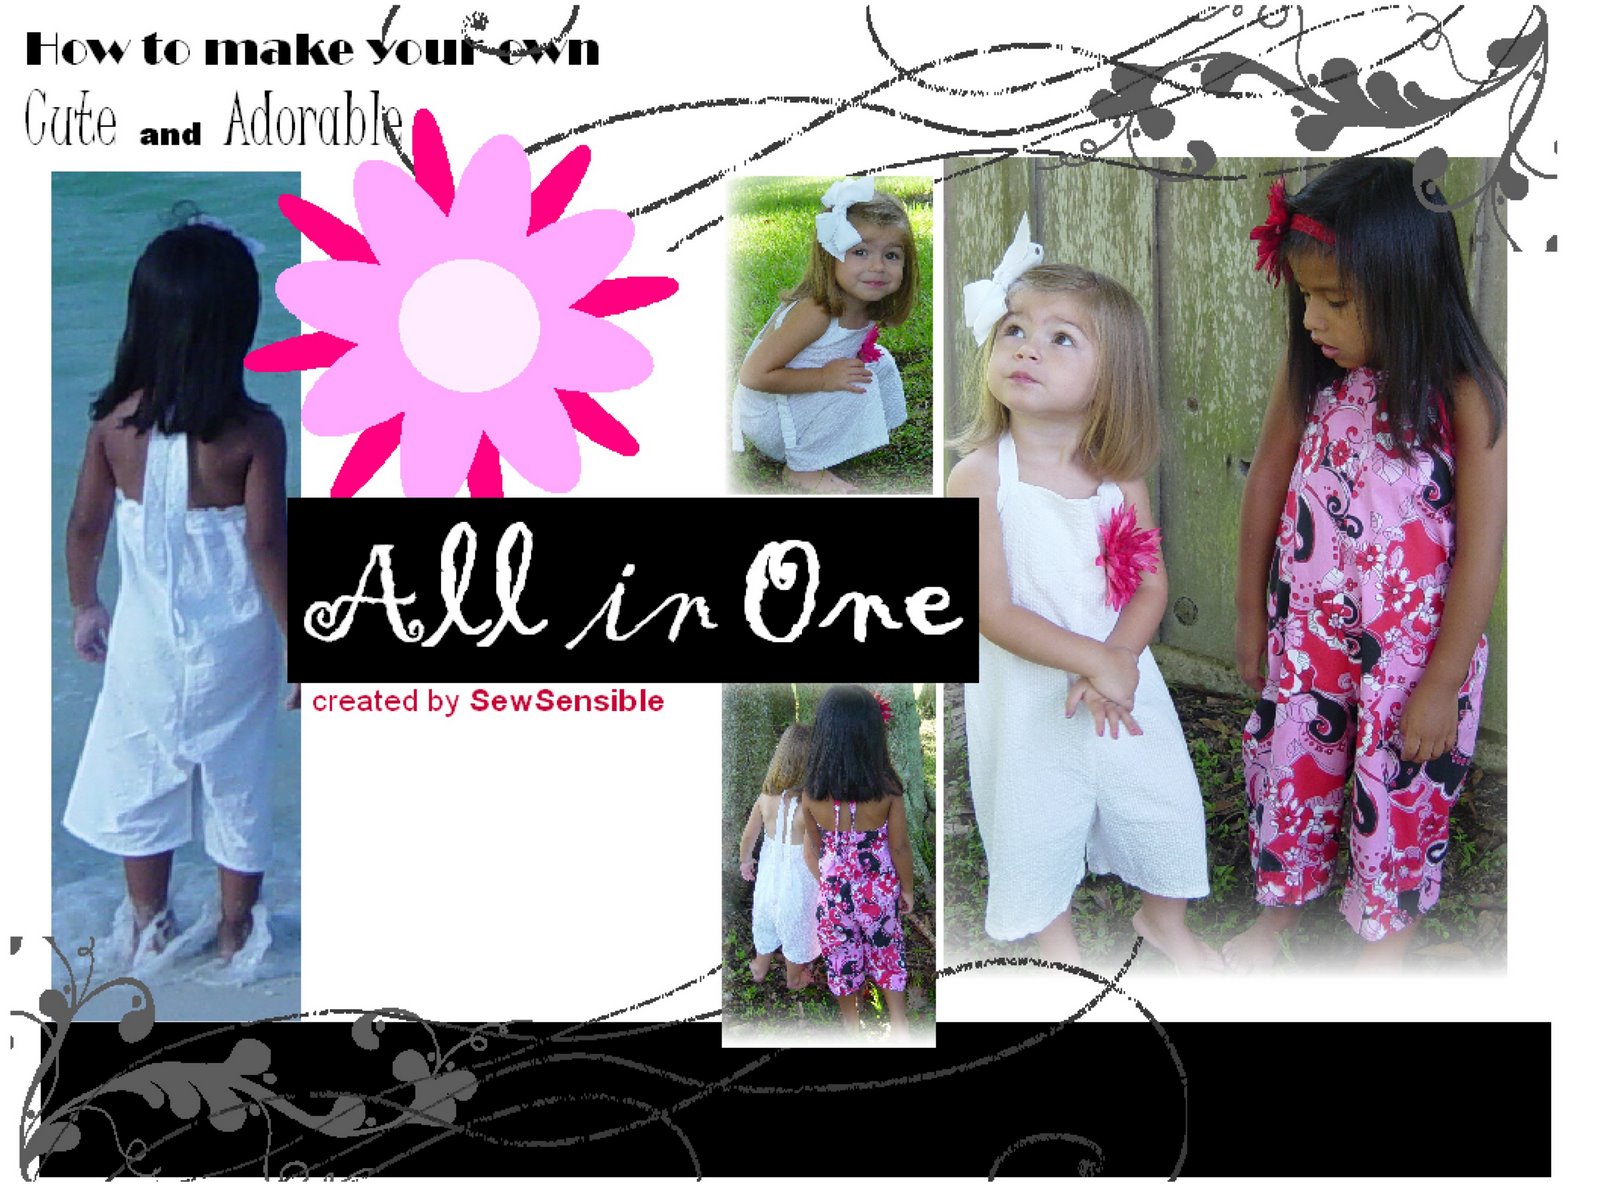 [All+in+One+cover2.jpg]